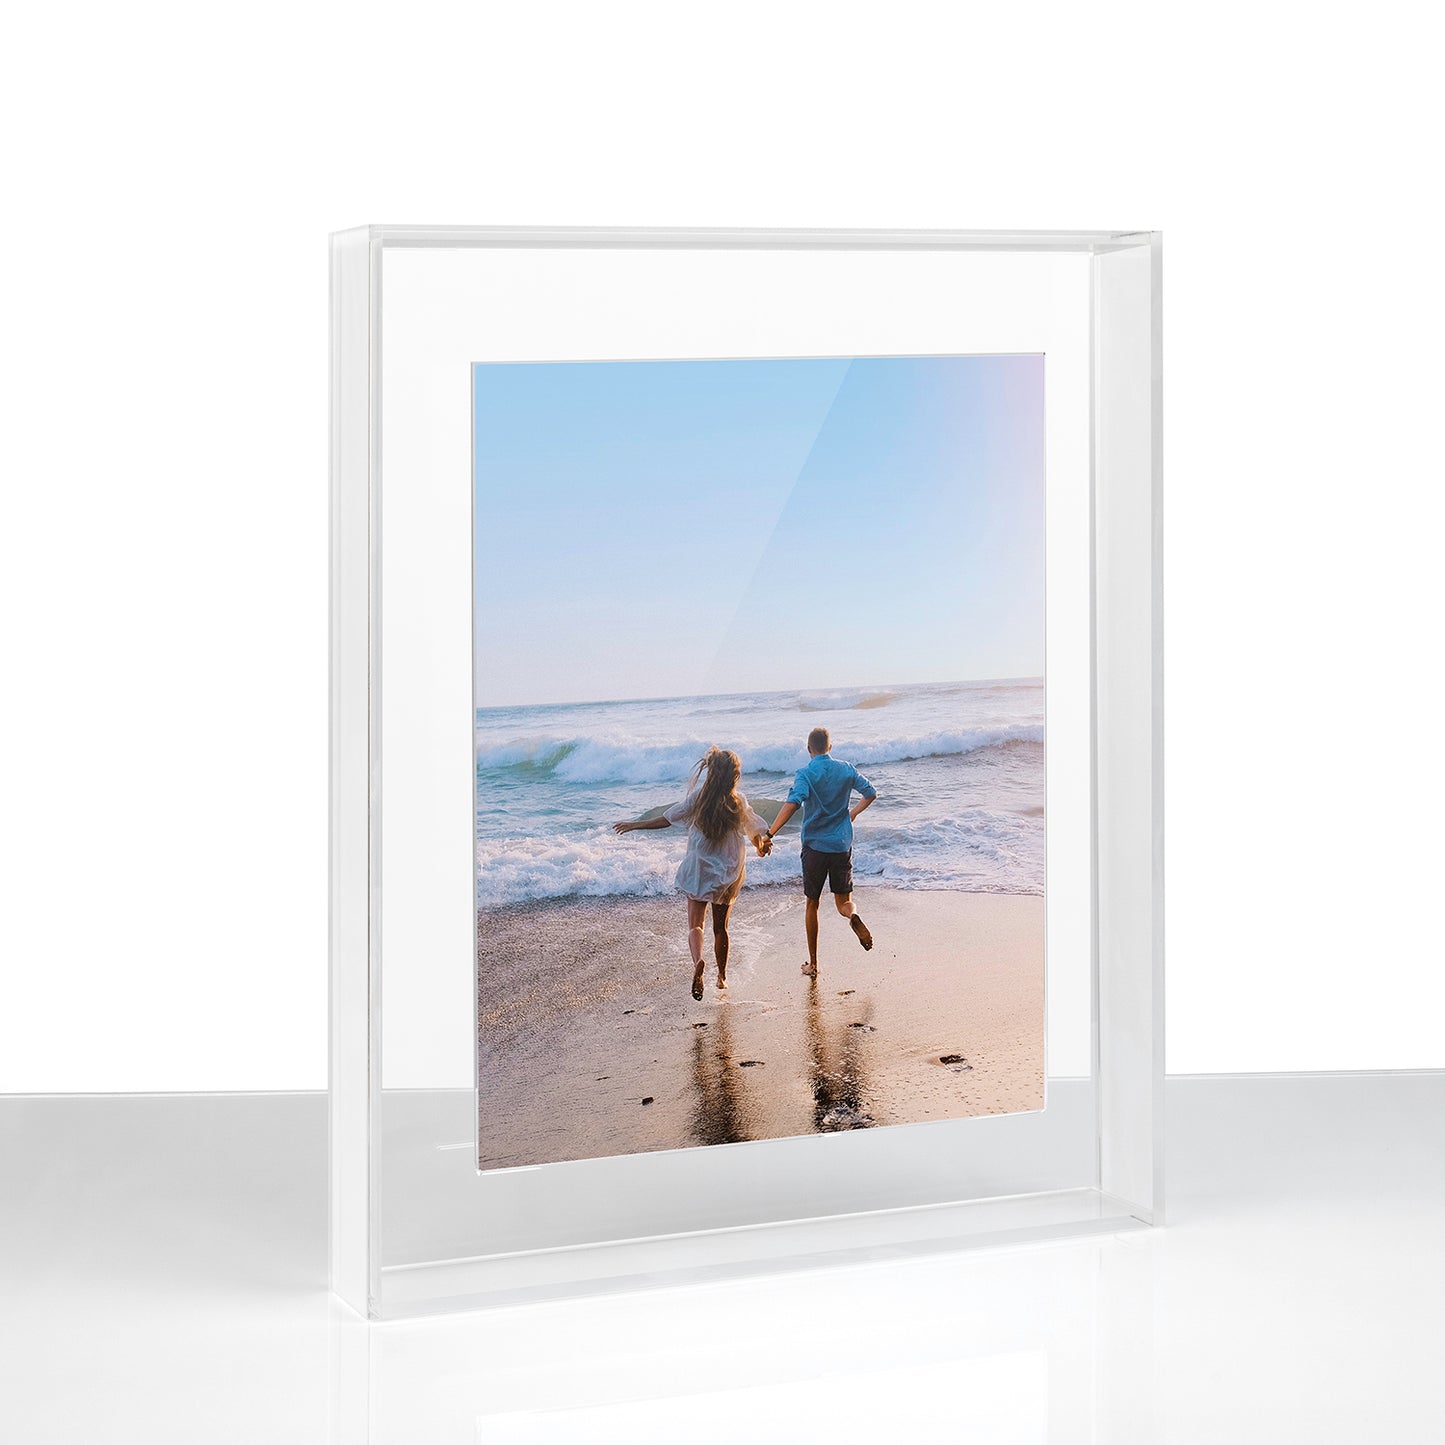 Case Pack of Five Float Frame for Tabletop or Wall with Magnetic Photo Holder (CHOOSE YOUR SIZE)